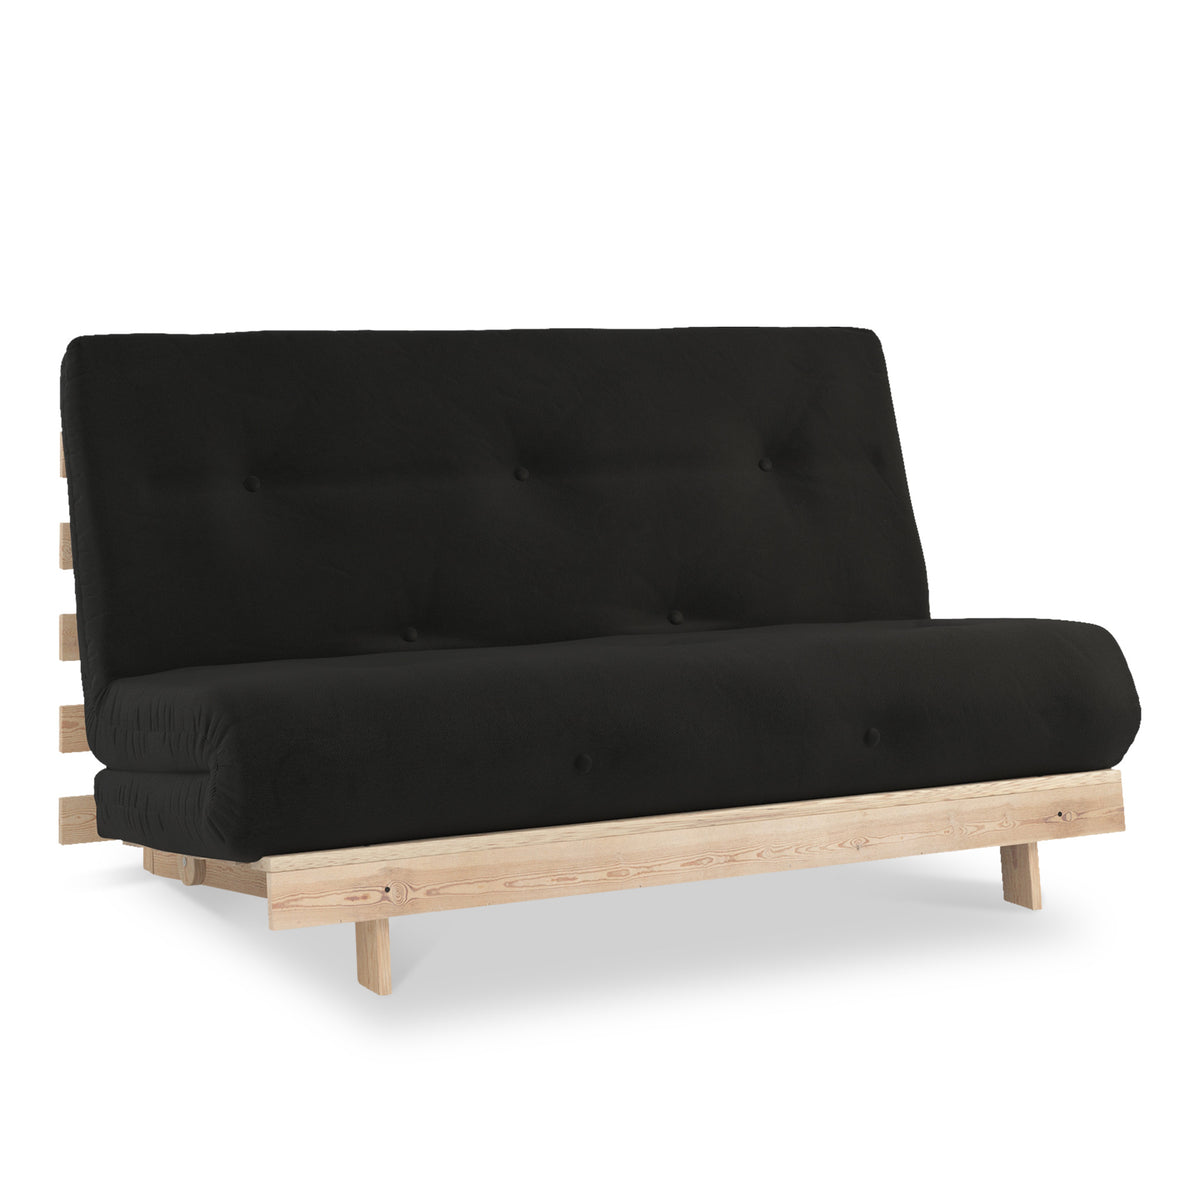 Maggie Black Double Futon Sofa Bed from Roseland Furniture